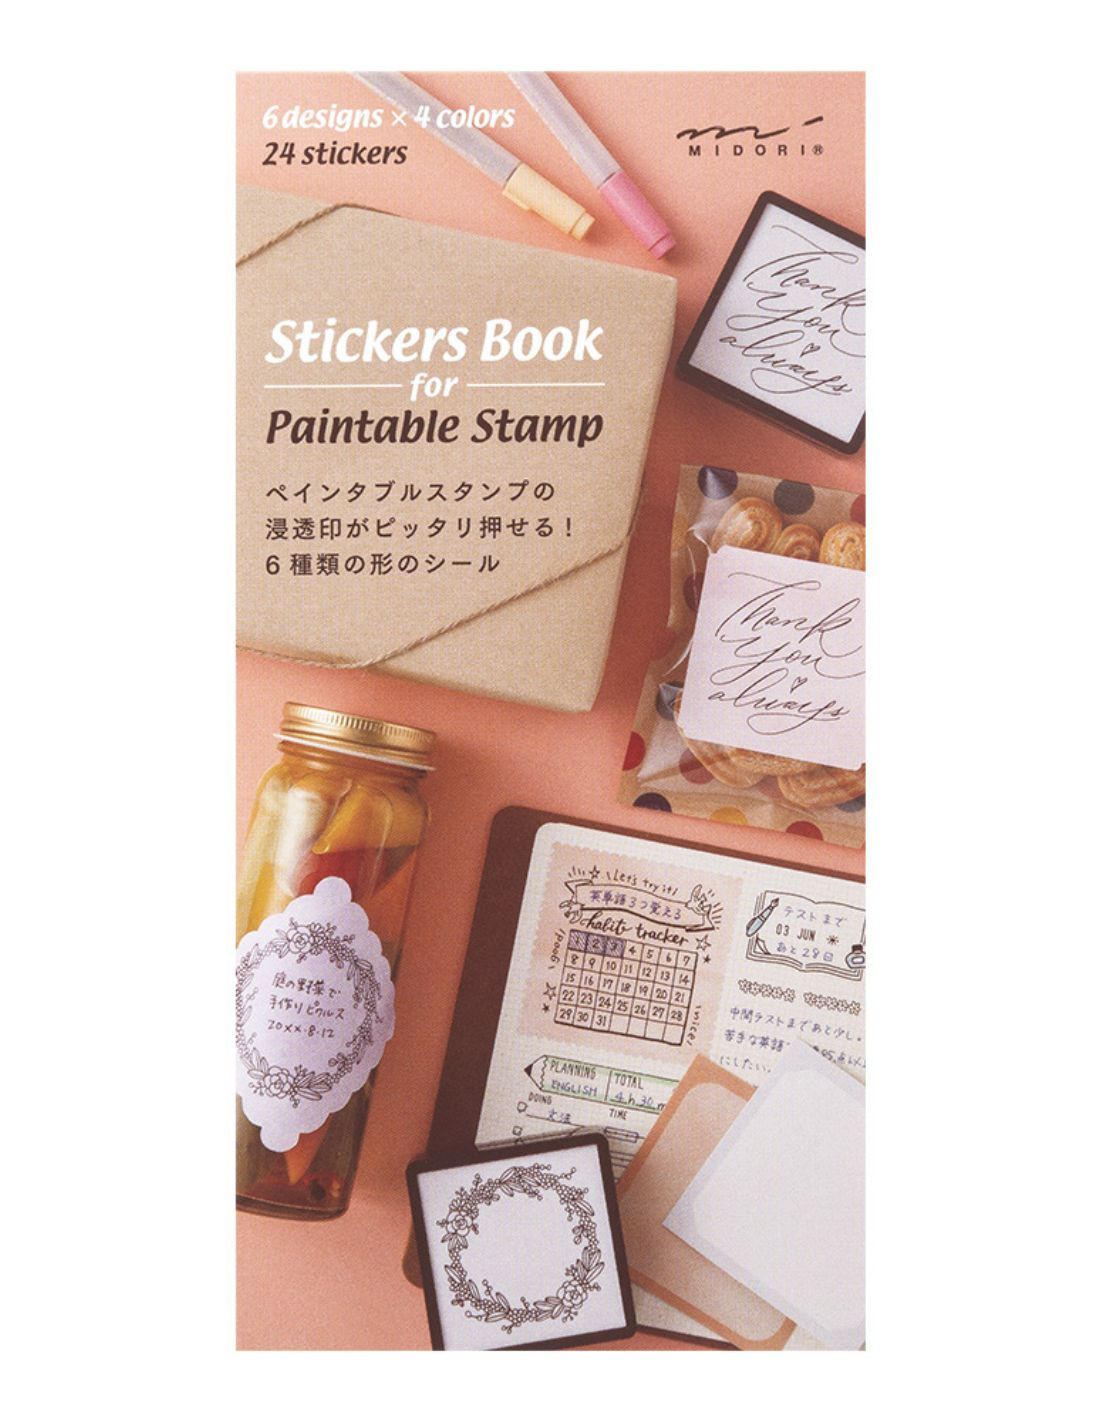 Stickers Book for Paintable Stamp - Warm Colors - Midori